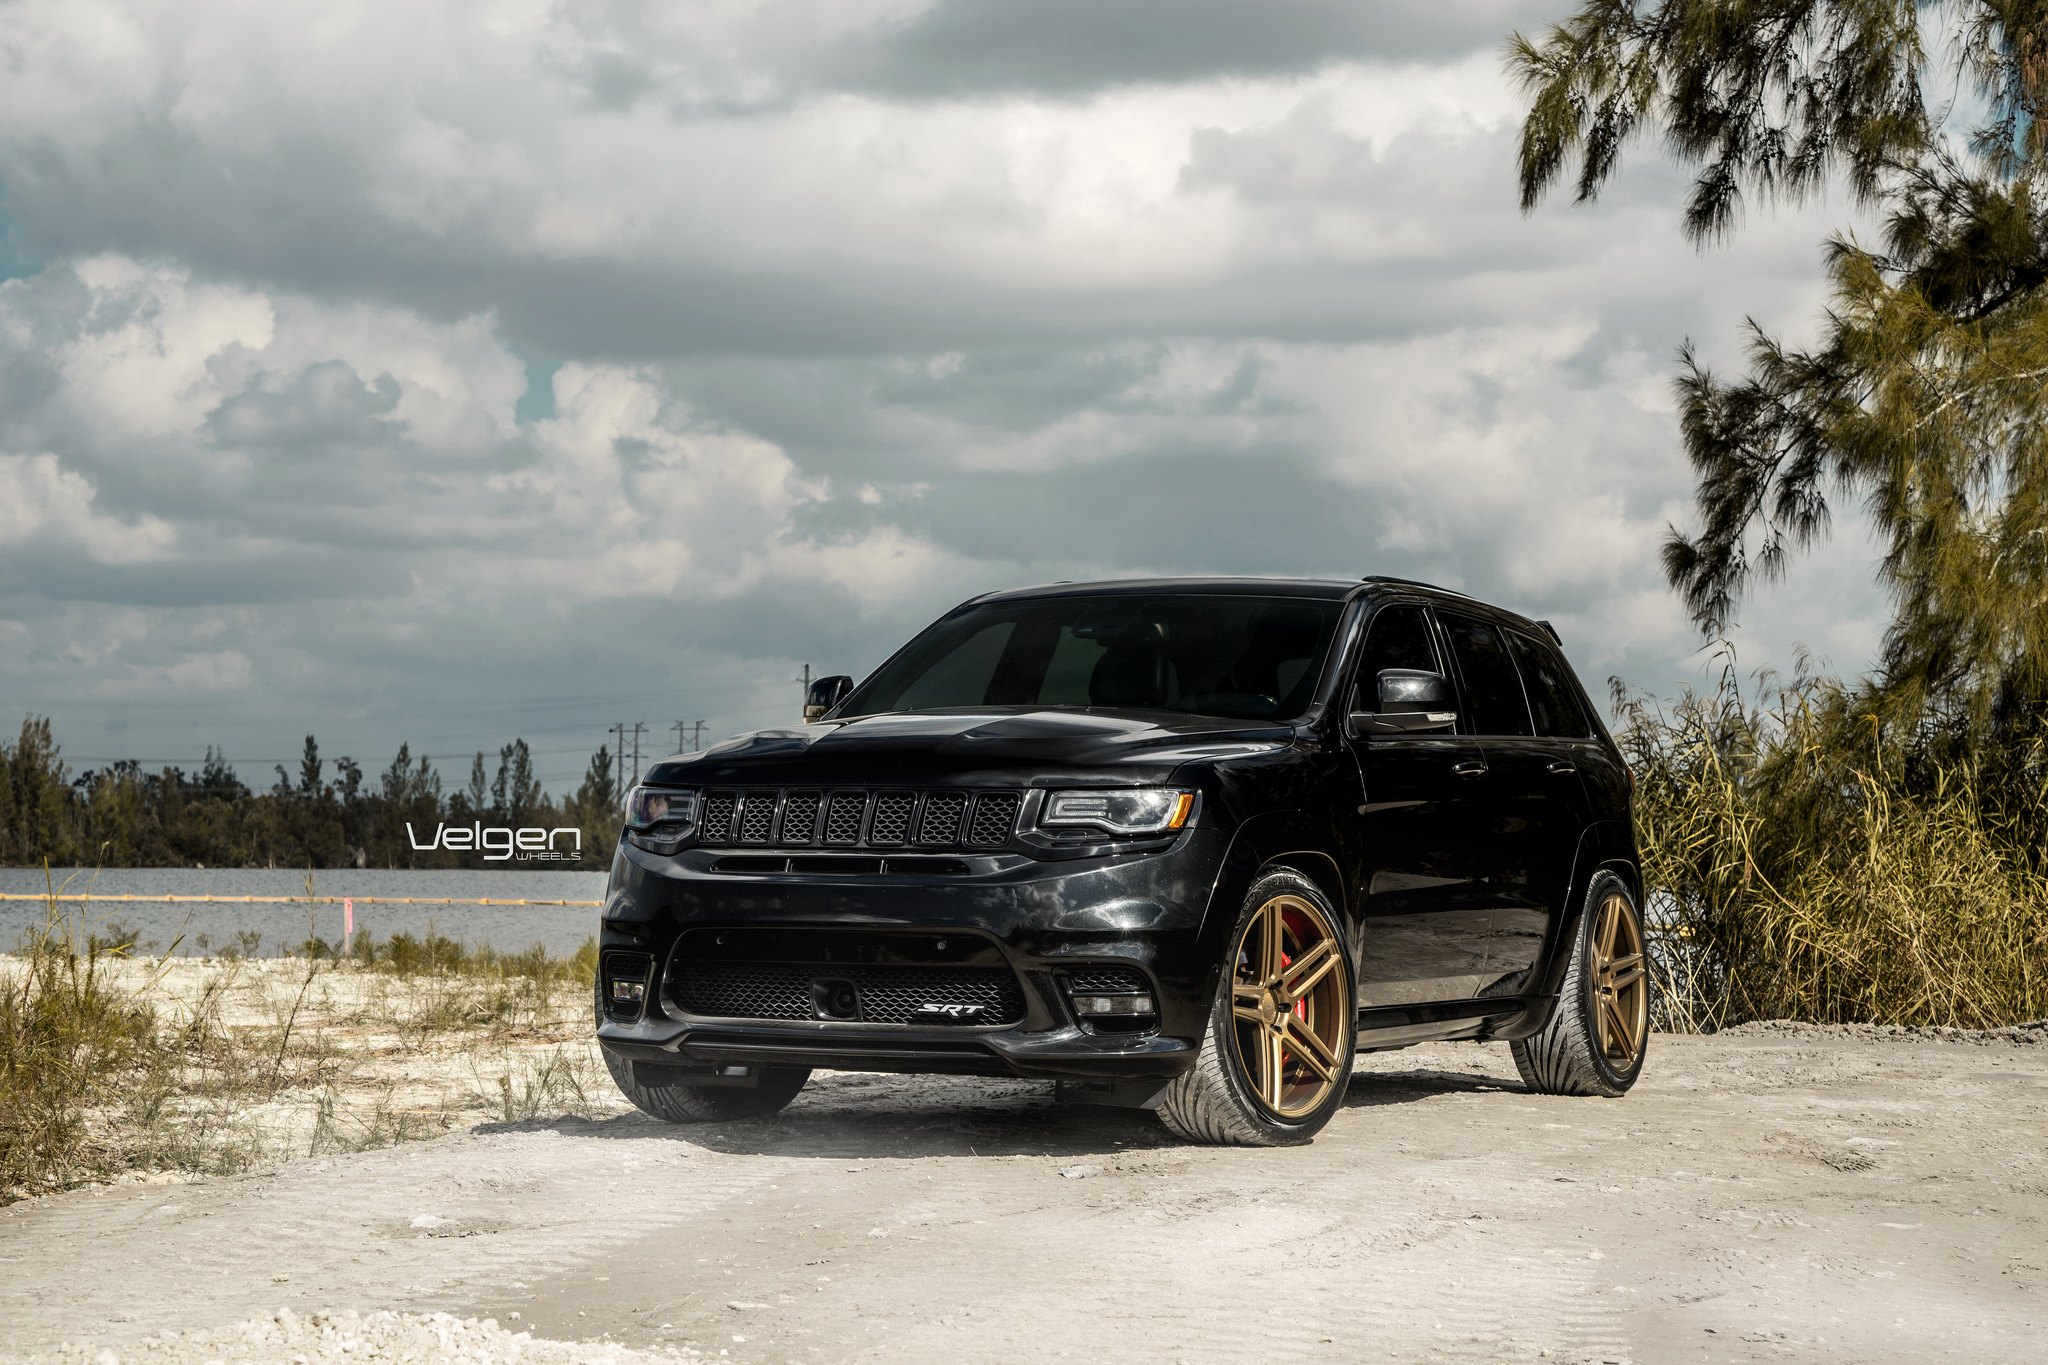 Blacked Out Mesh Grille on Jeep Grand Cherokee - Photo by Velgen